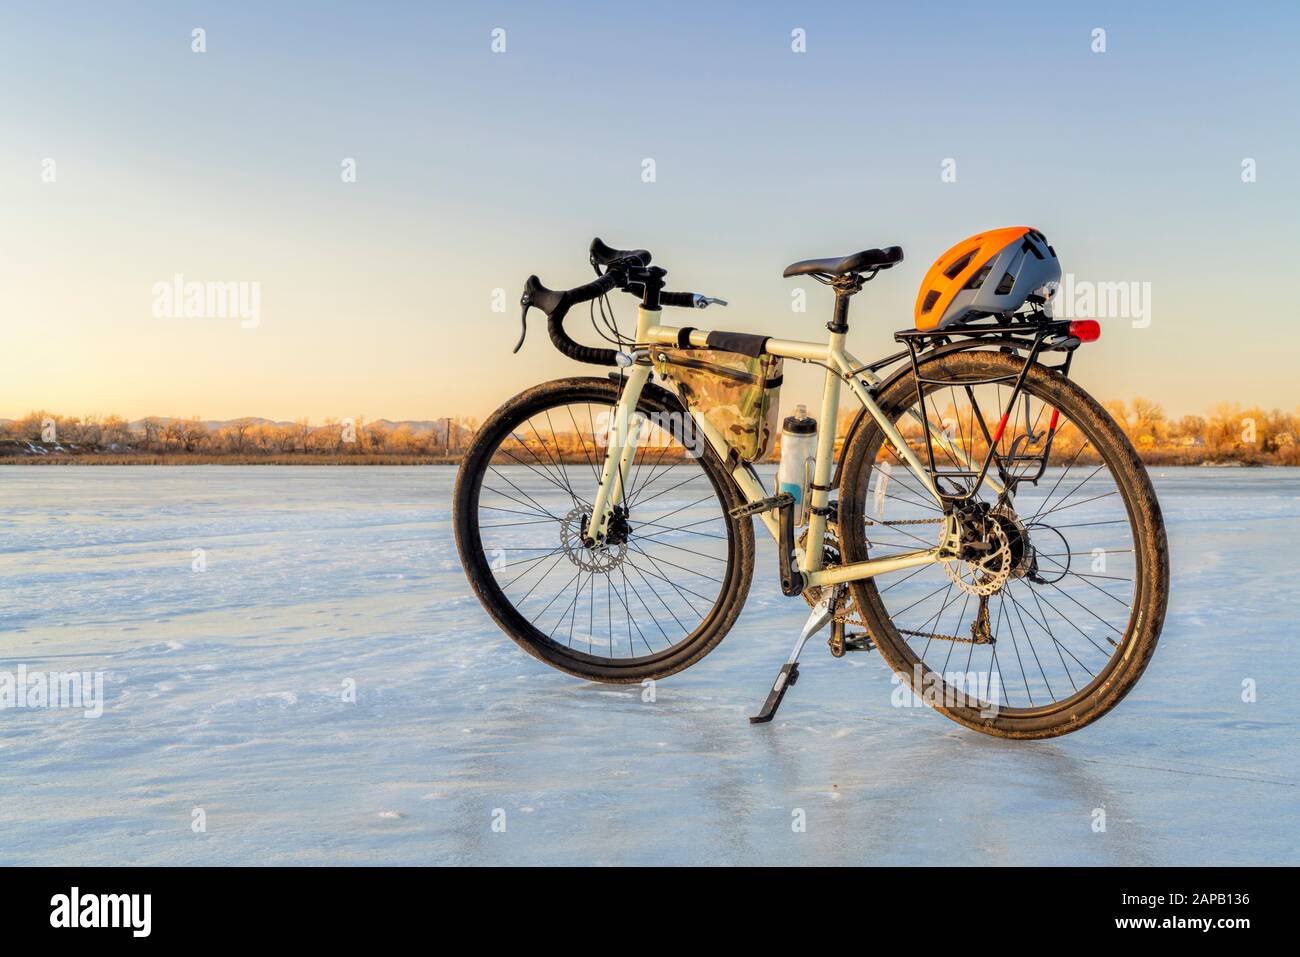 Winter biking, touring or commuting - bicycle on an icy lake. Helmet on racks, frame bag, kickstand. Riverbend Ponds Natural Area in Fort Collins, Col Stock Photo